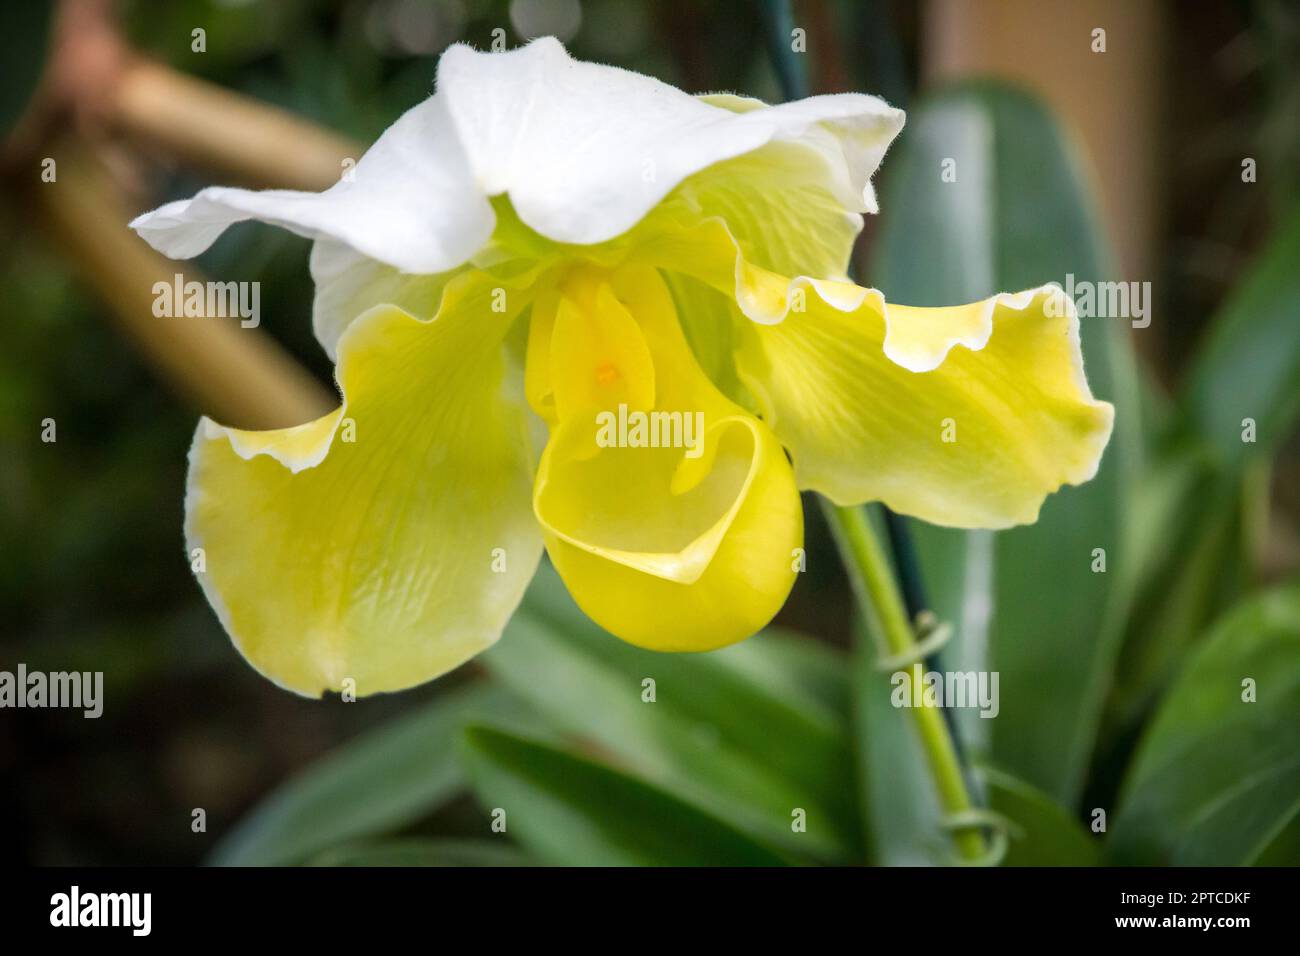 Orchid flower, Yellow Splendid Paphiopedilum. Tropical floral background Stock Photo